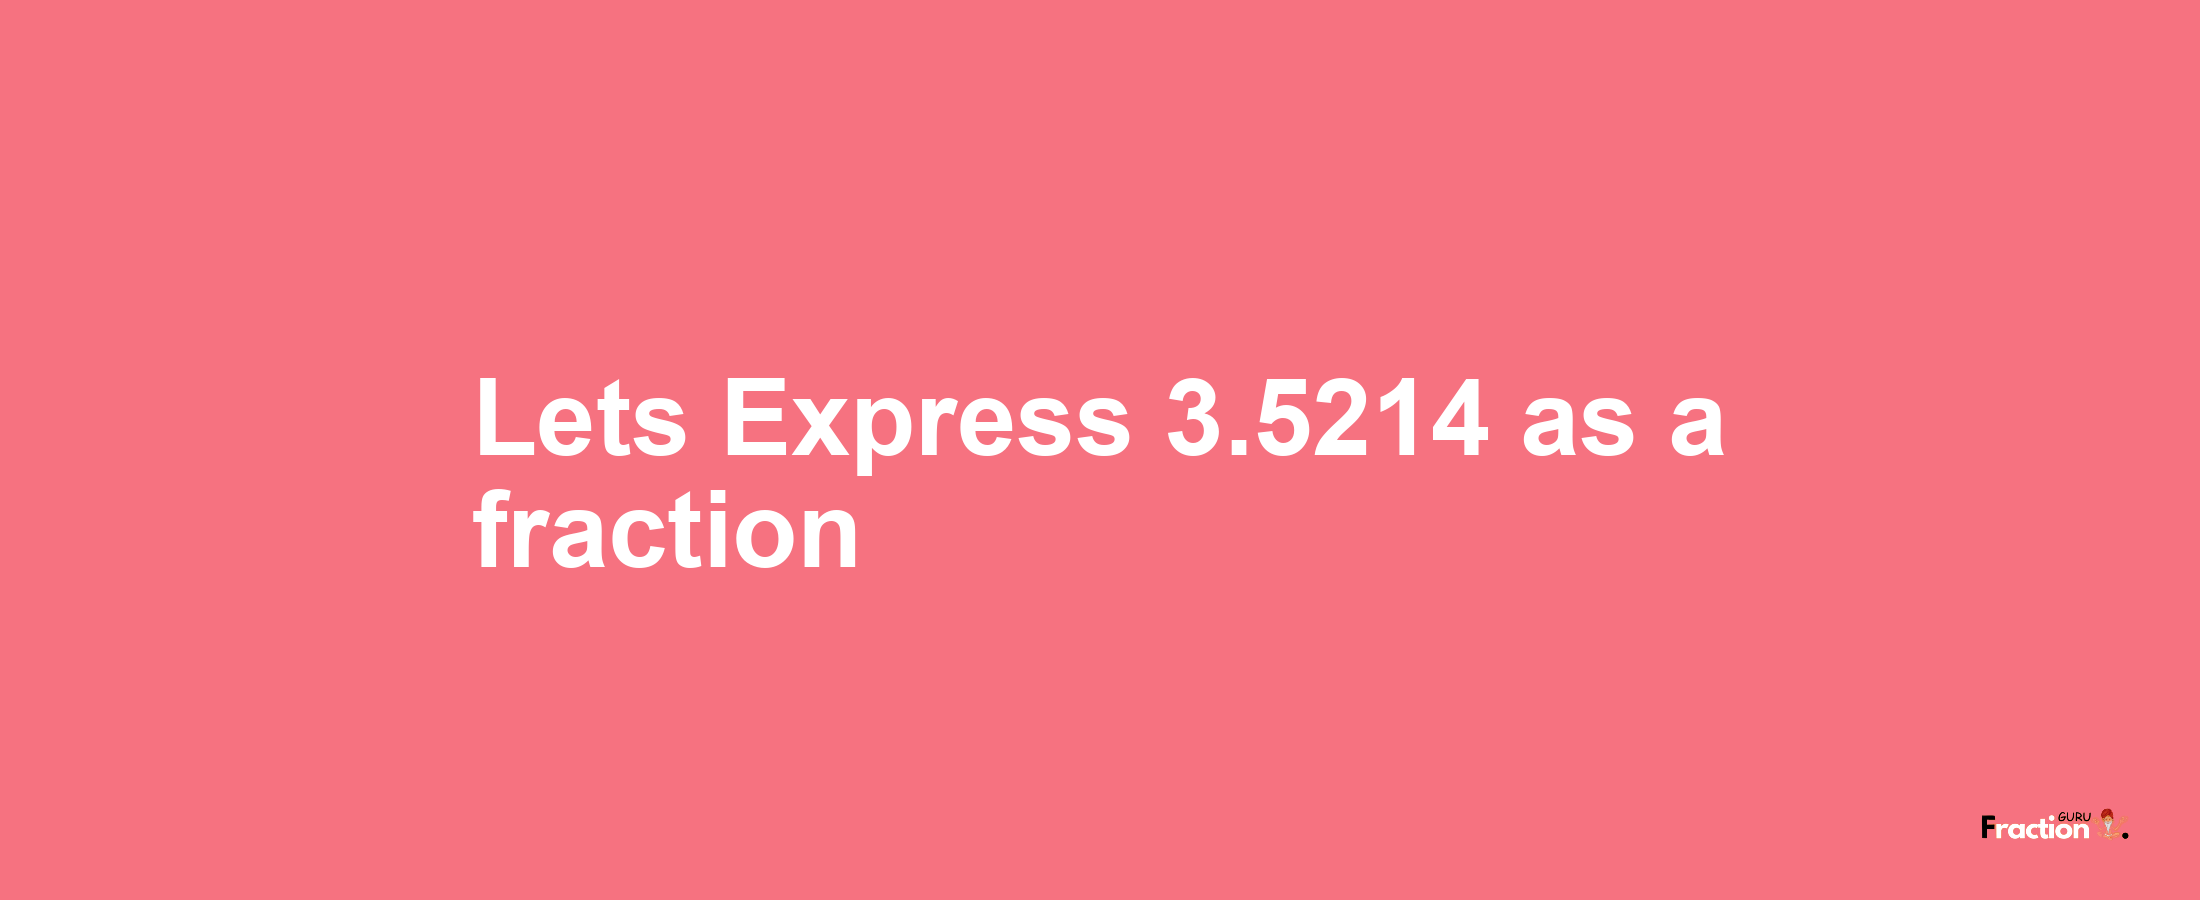 Lets Express 3.5214 as afraction